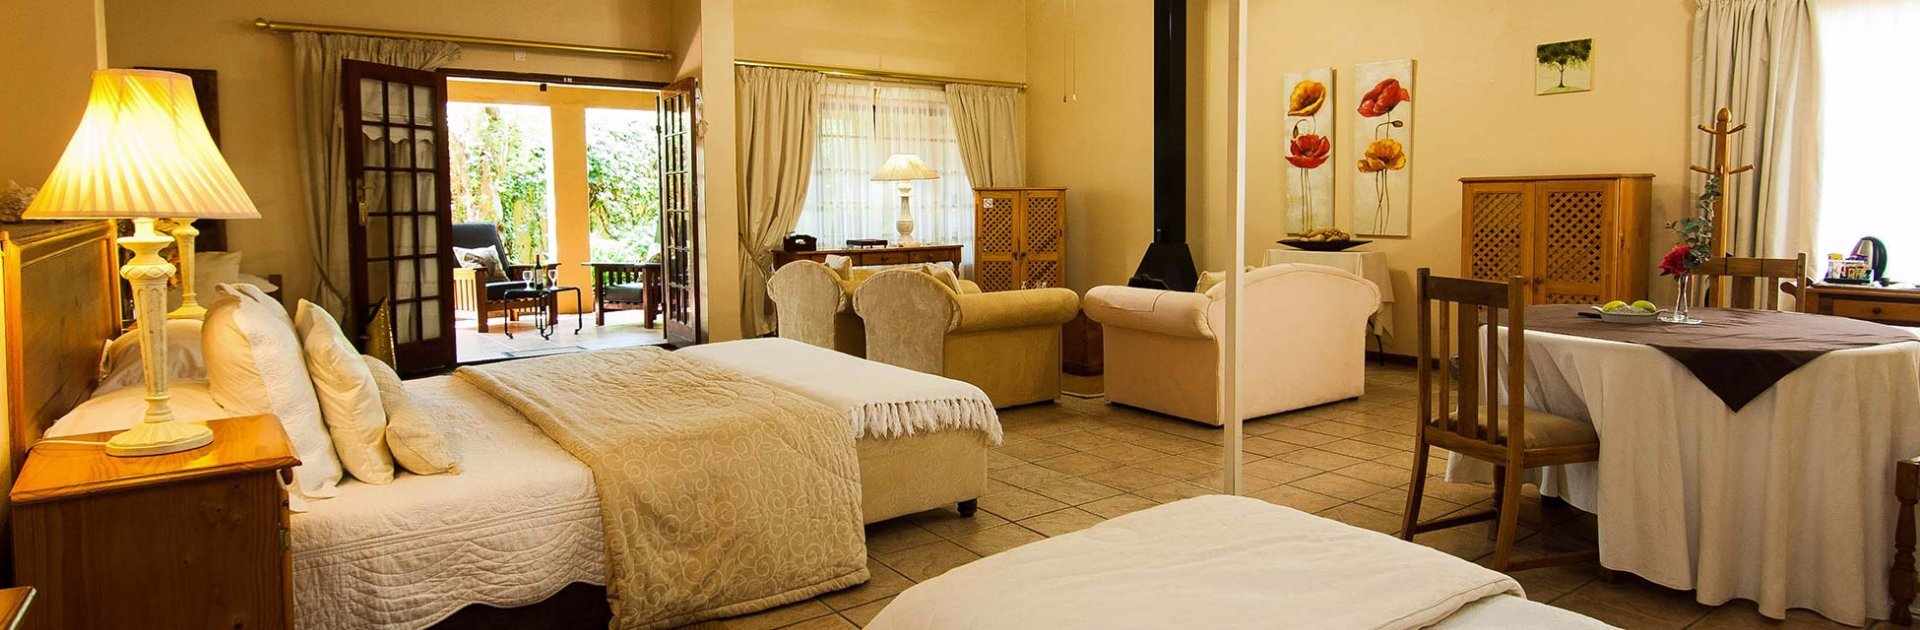 Addo-accommodation-rates-bed-breakfast